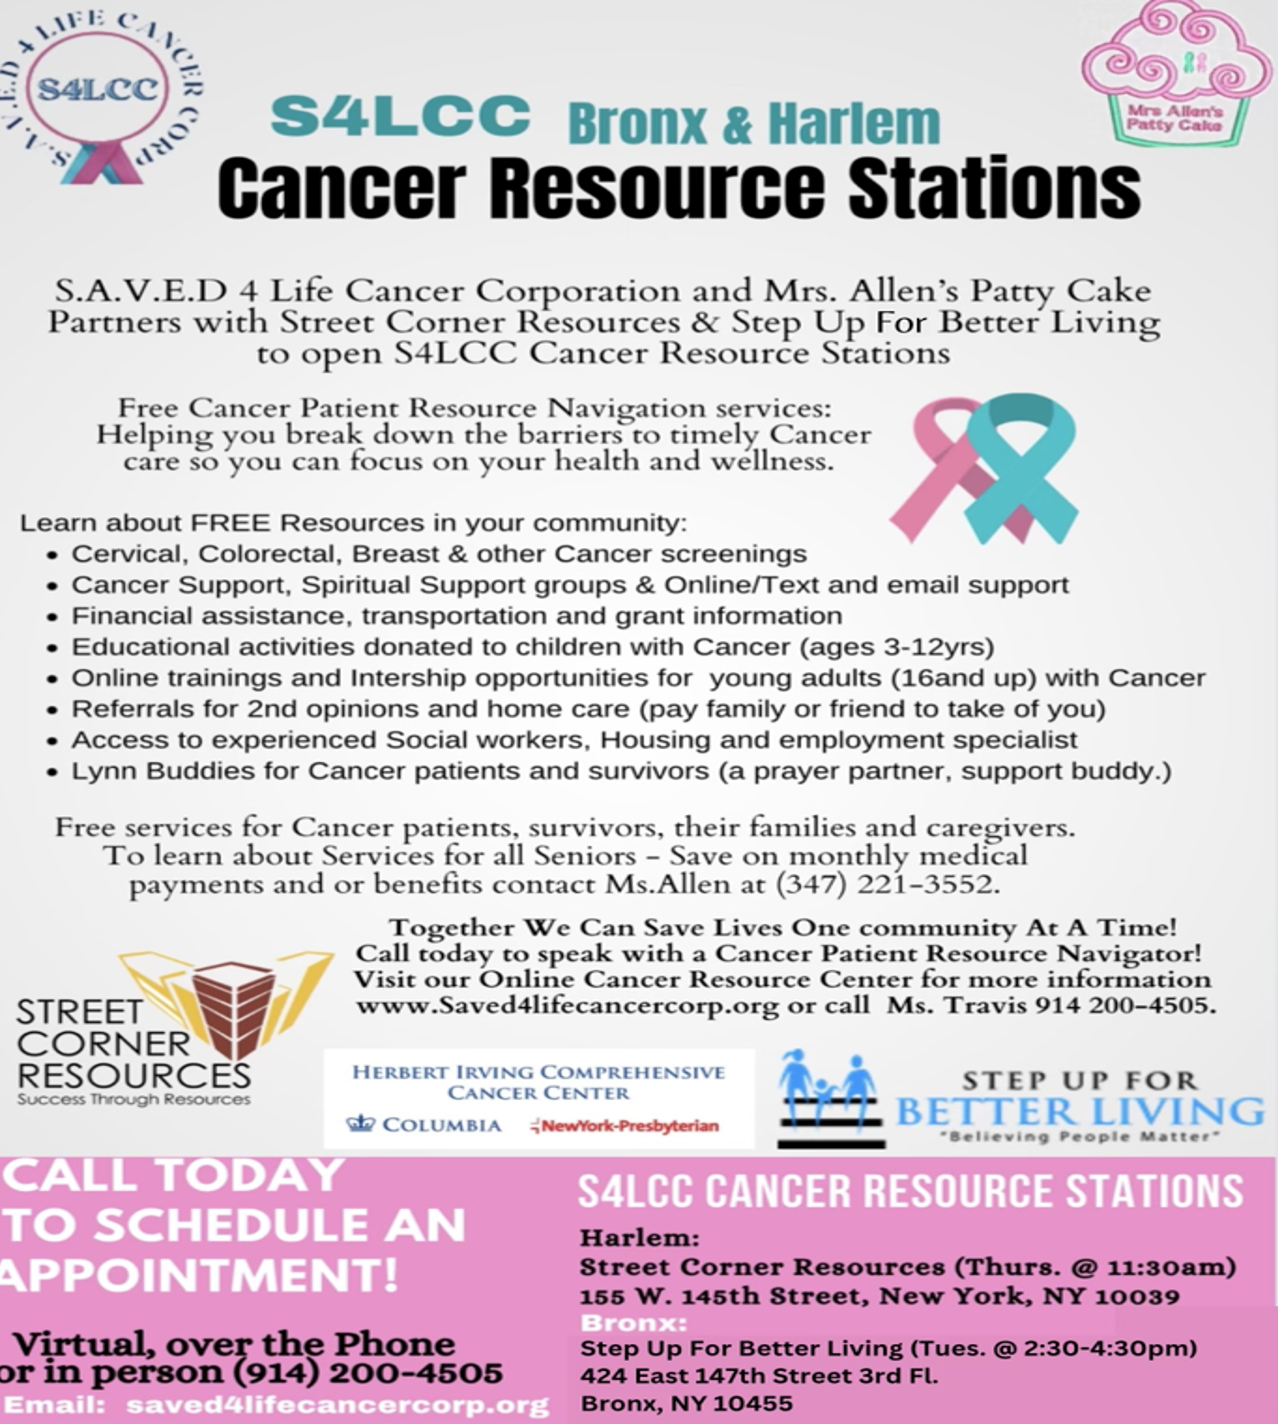 Cancer Resource Stations flyer with information